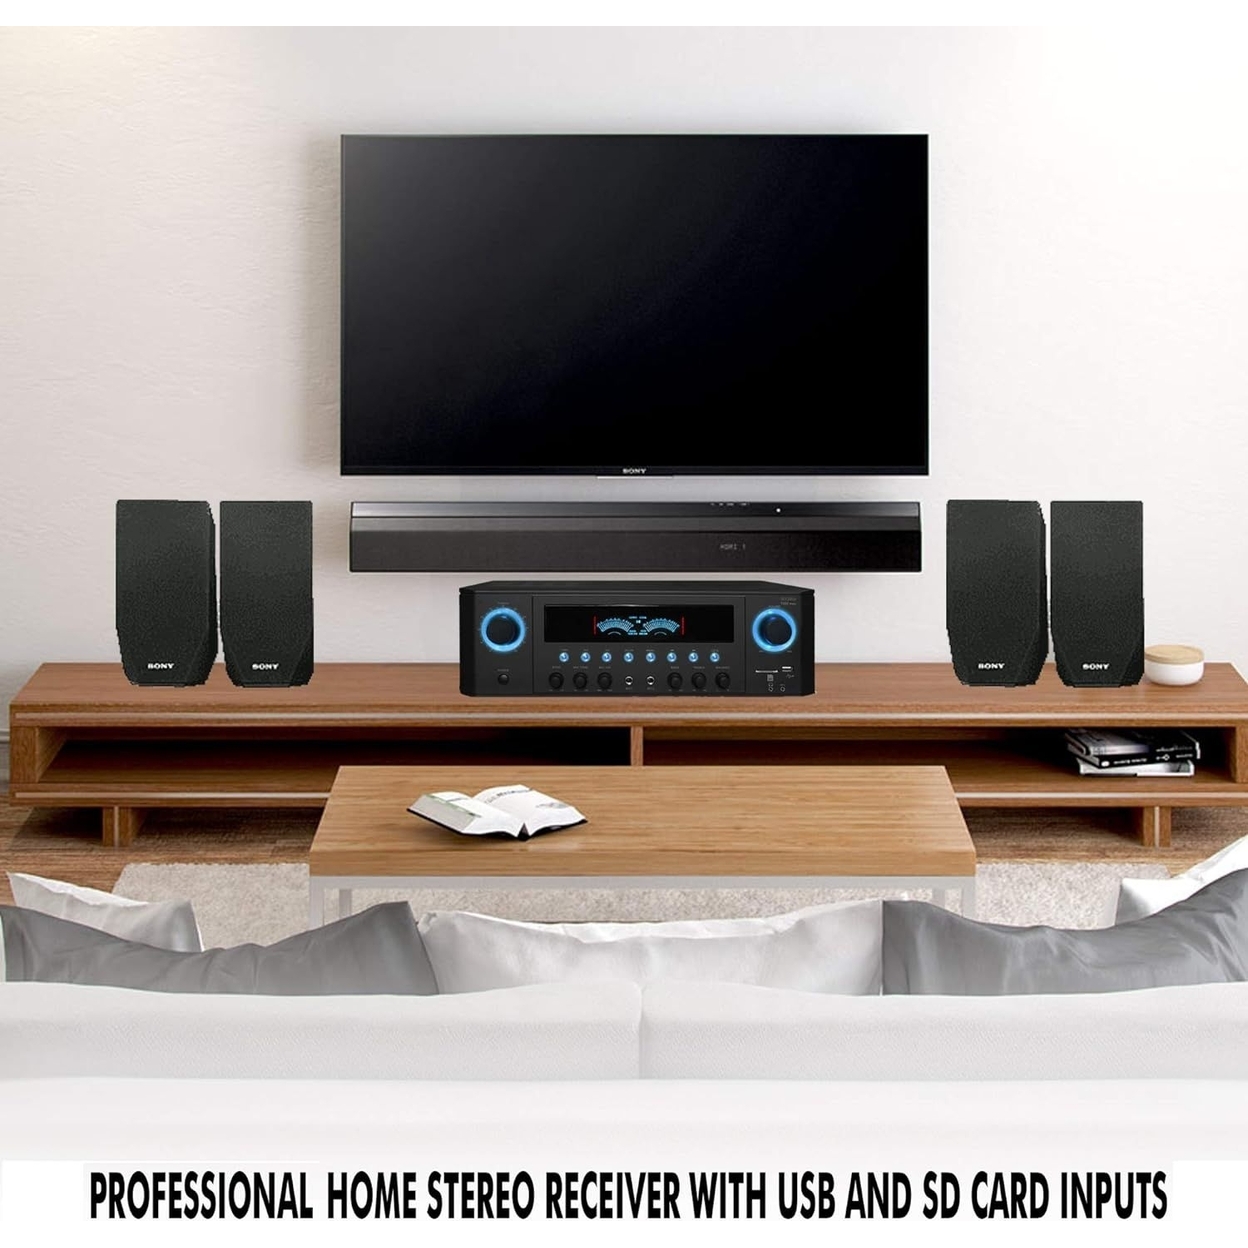 Technical Pro 1000W Professional Home Stereo Receiver W/ USB & SD Card Inputs + 2 Pairs Of 5.25 Ceiling Wall Mount Frame-less Speakers